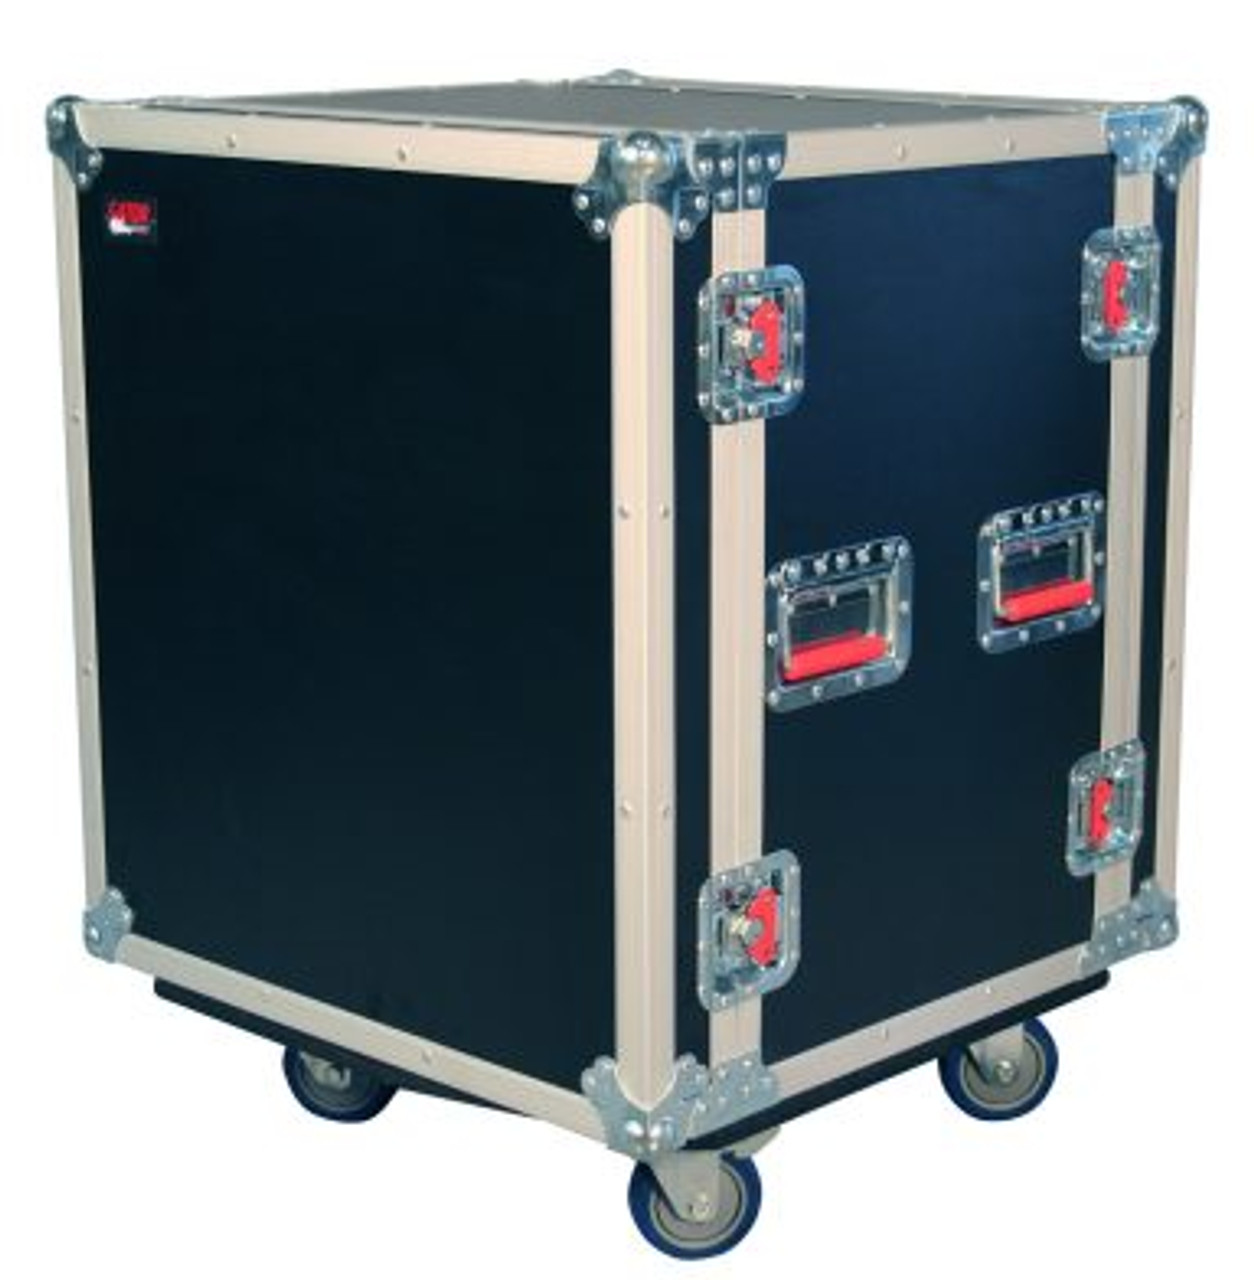 Gator G-TOUR SHK12 CA Shock Audio Road Rack Case With Casters